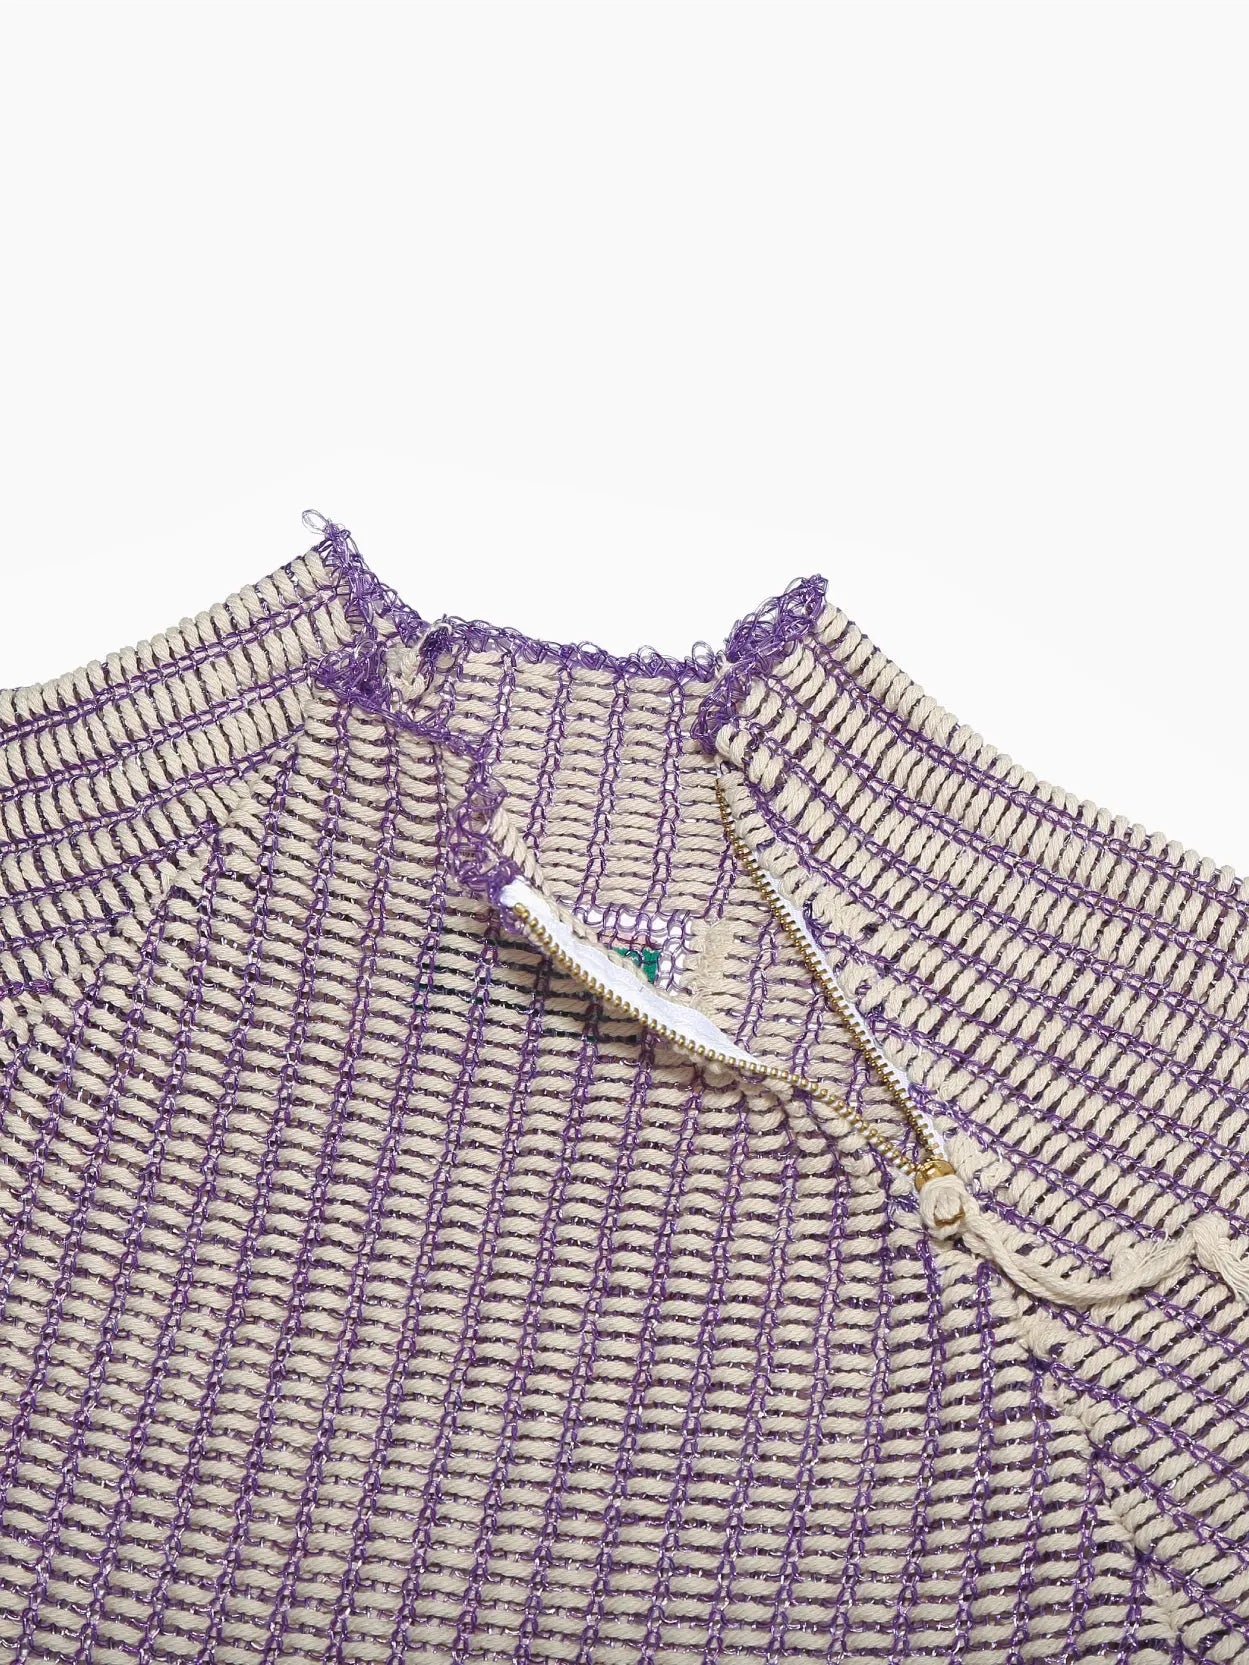 A wide-sleeve, knitted Keya Sweater Lavender from Bielo in a light purple color with a loose fit. The design features horizontal ribbed patterns and slight, rounded neck detailing. The hem and sleeve edges have subtle, dark purple accents. The top is laid flat on a white background.